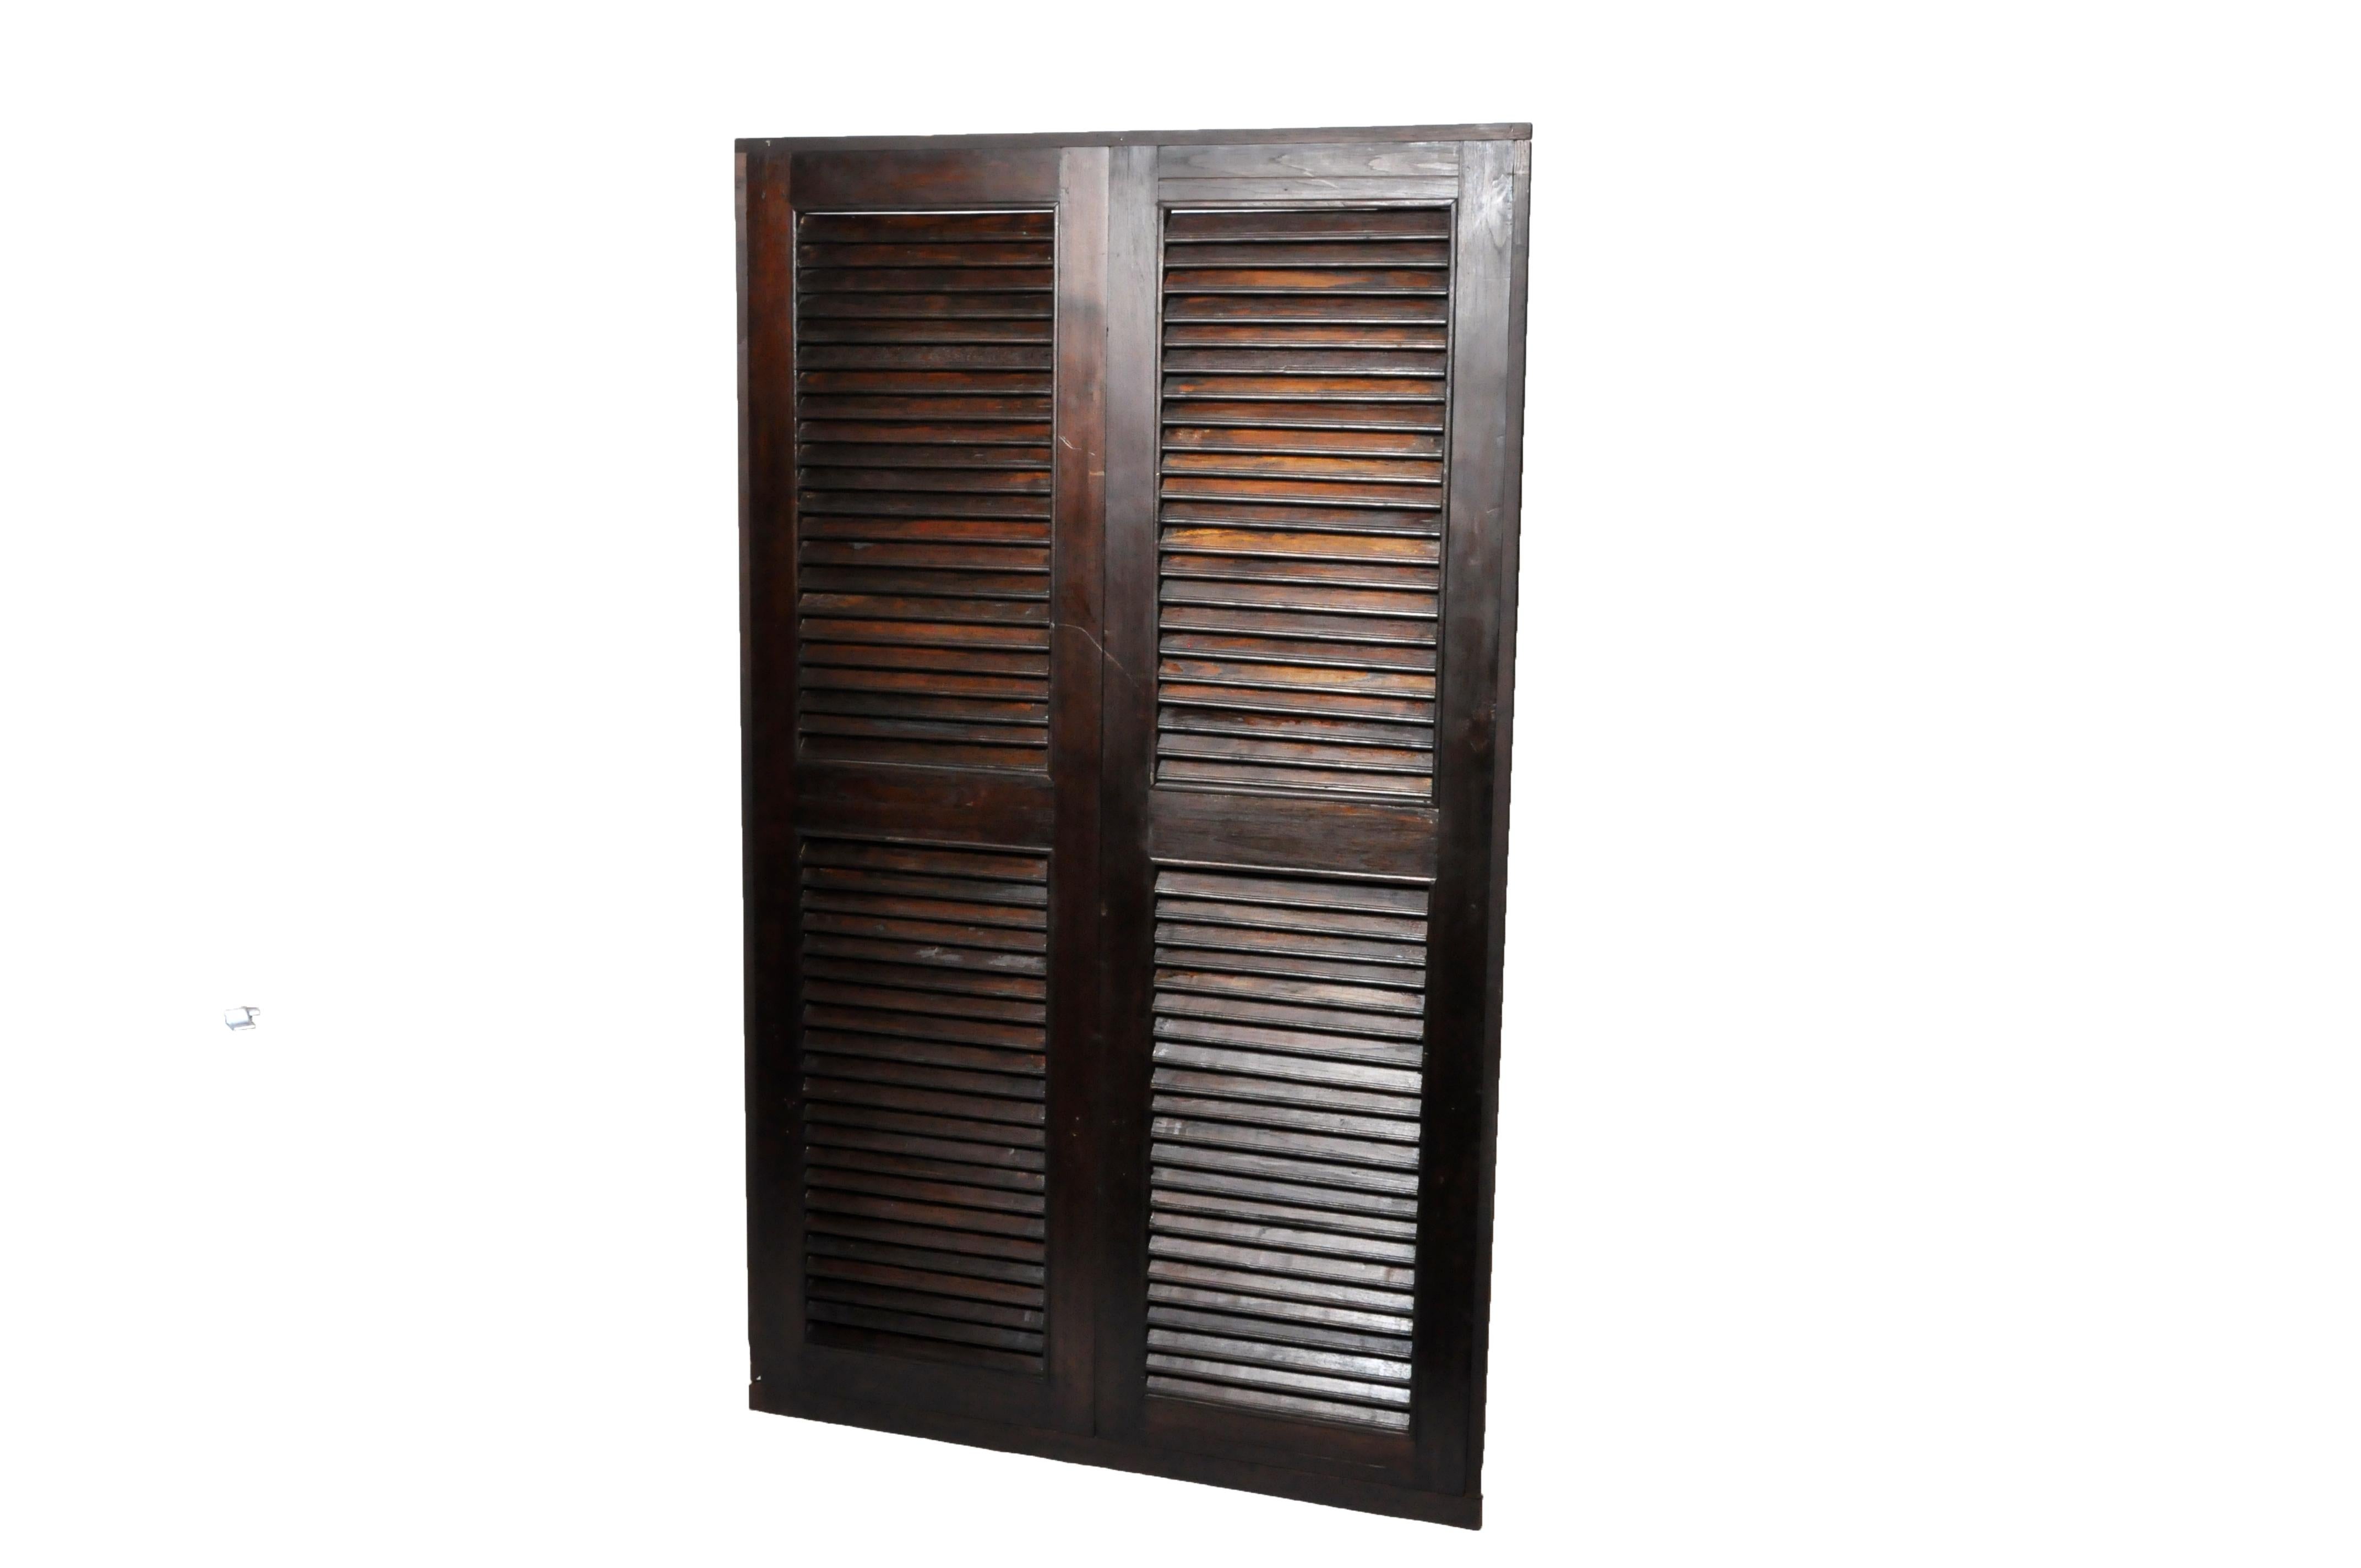 Thai residential walls often incorporated louvered walls, doors, and grilled transoms. Teak was the universally preferred wood on account of its insect and moisture –resistance. These shutters could be hinged and incorporated into the interior or